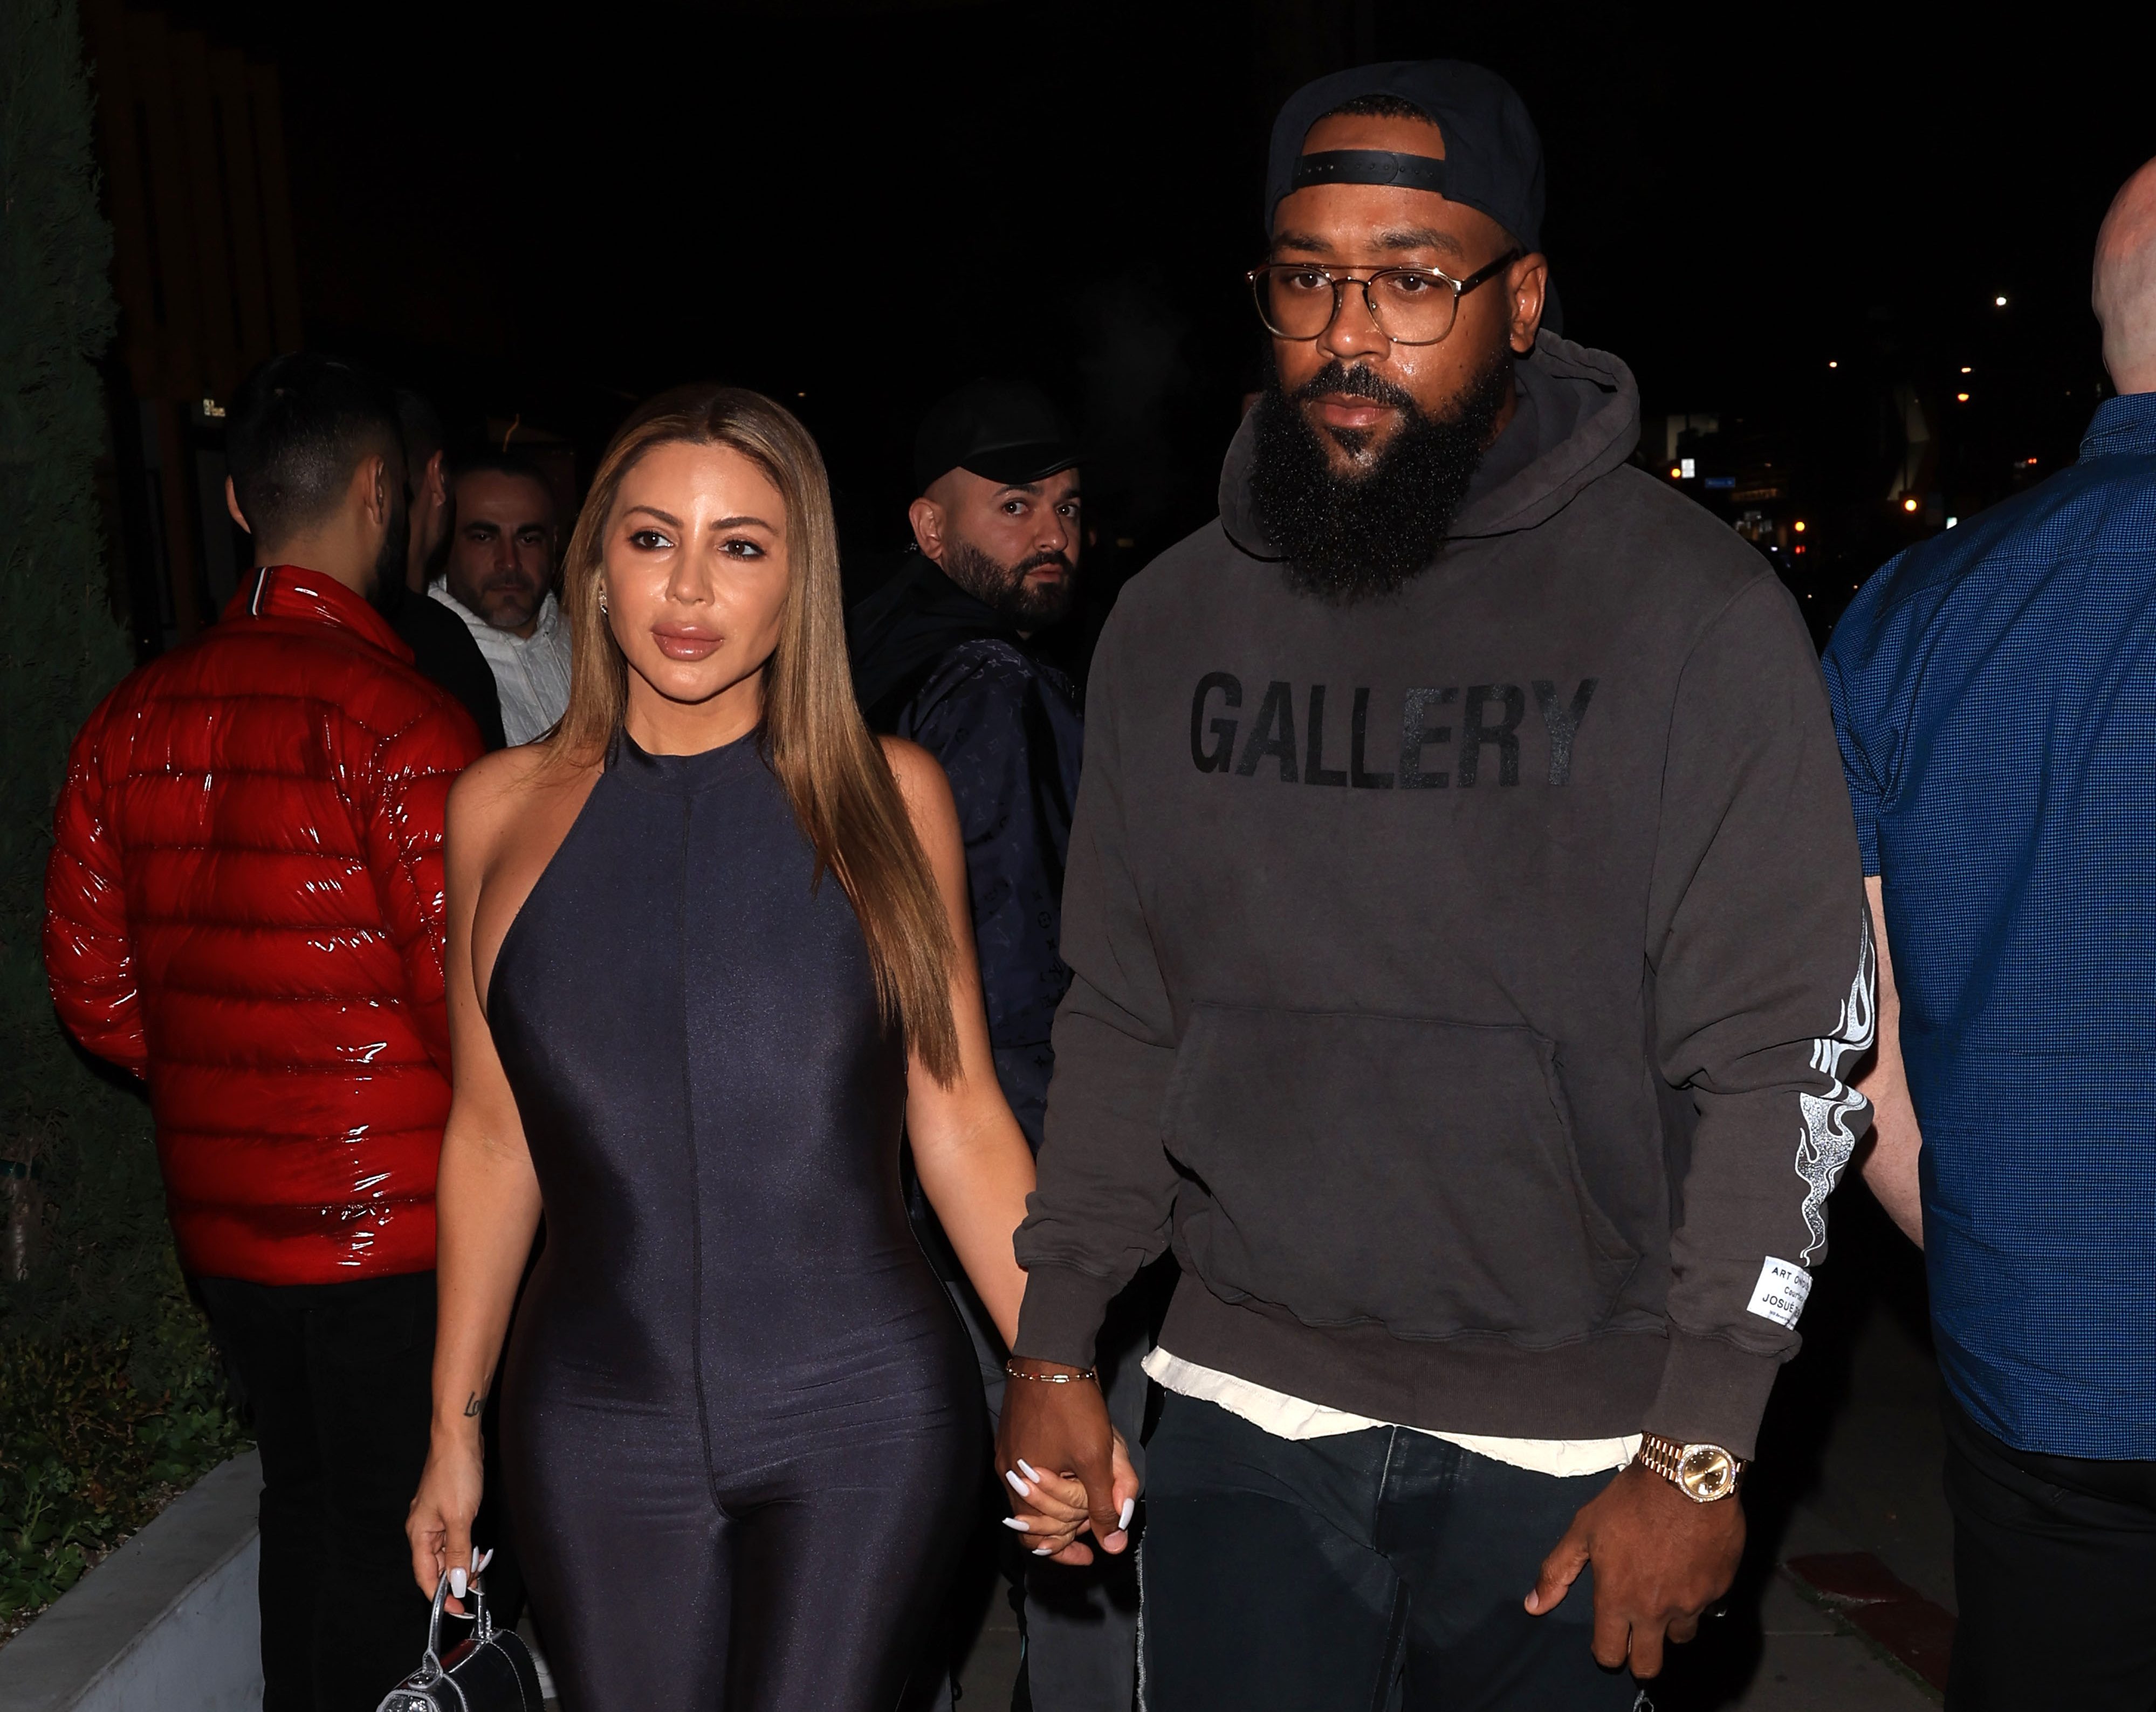 Larsa Pippen & Marcus Jordan Step Out For Date Night While Socialite Faces Backlash